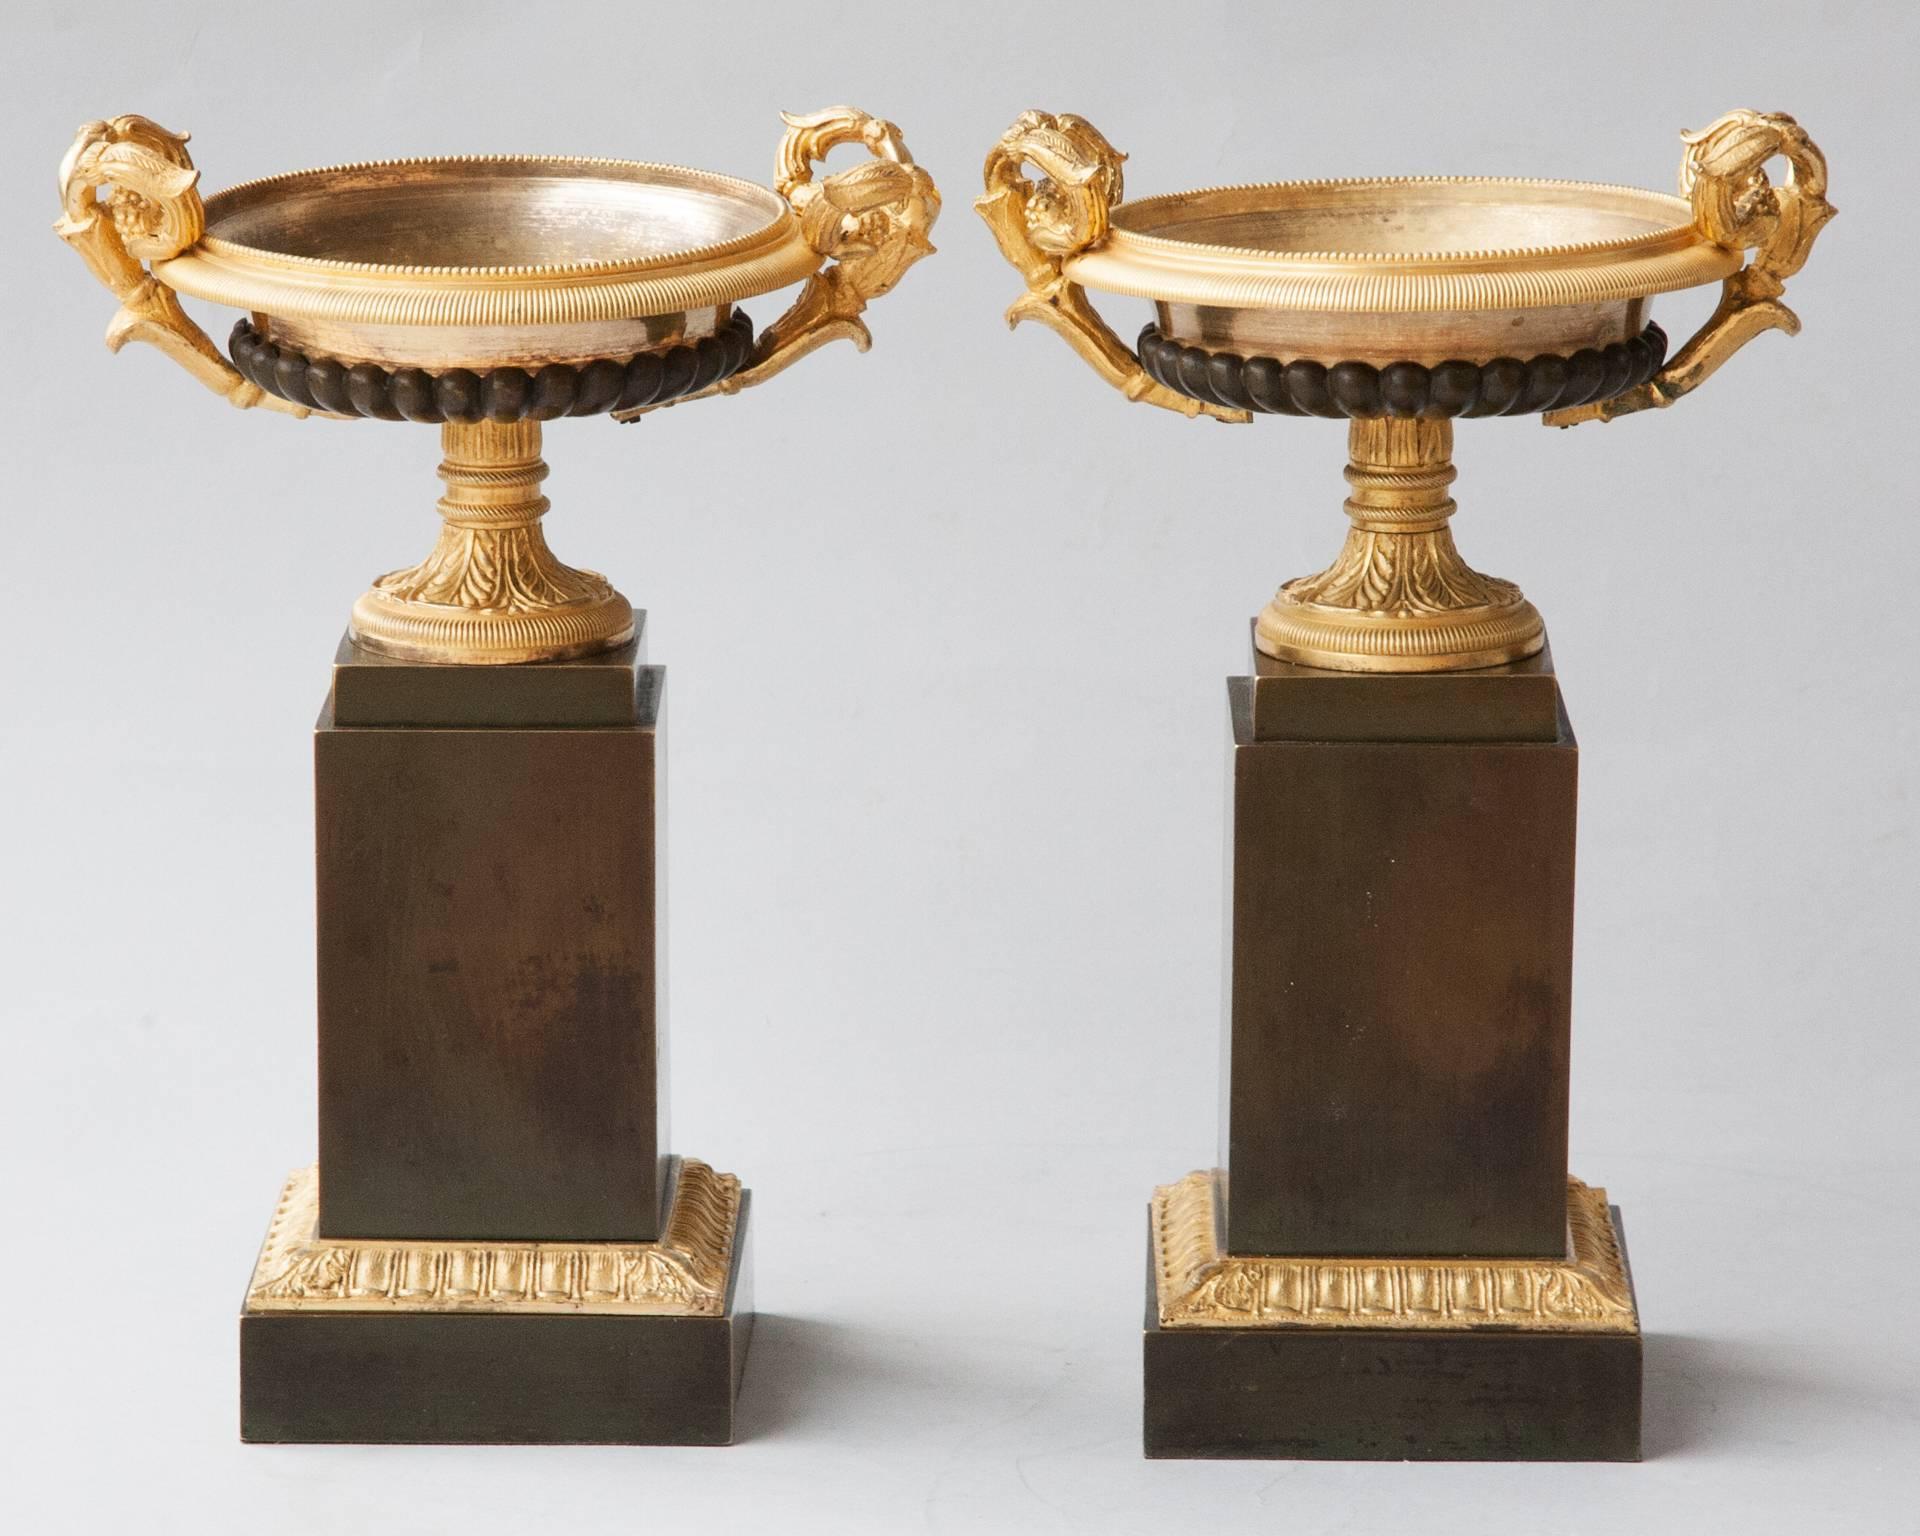 19th Century Pair of Restauration Period Gilt and Patinated Bronze Tazza Urns For Sale